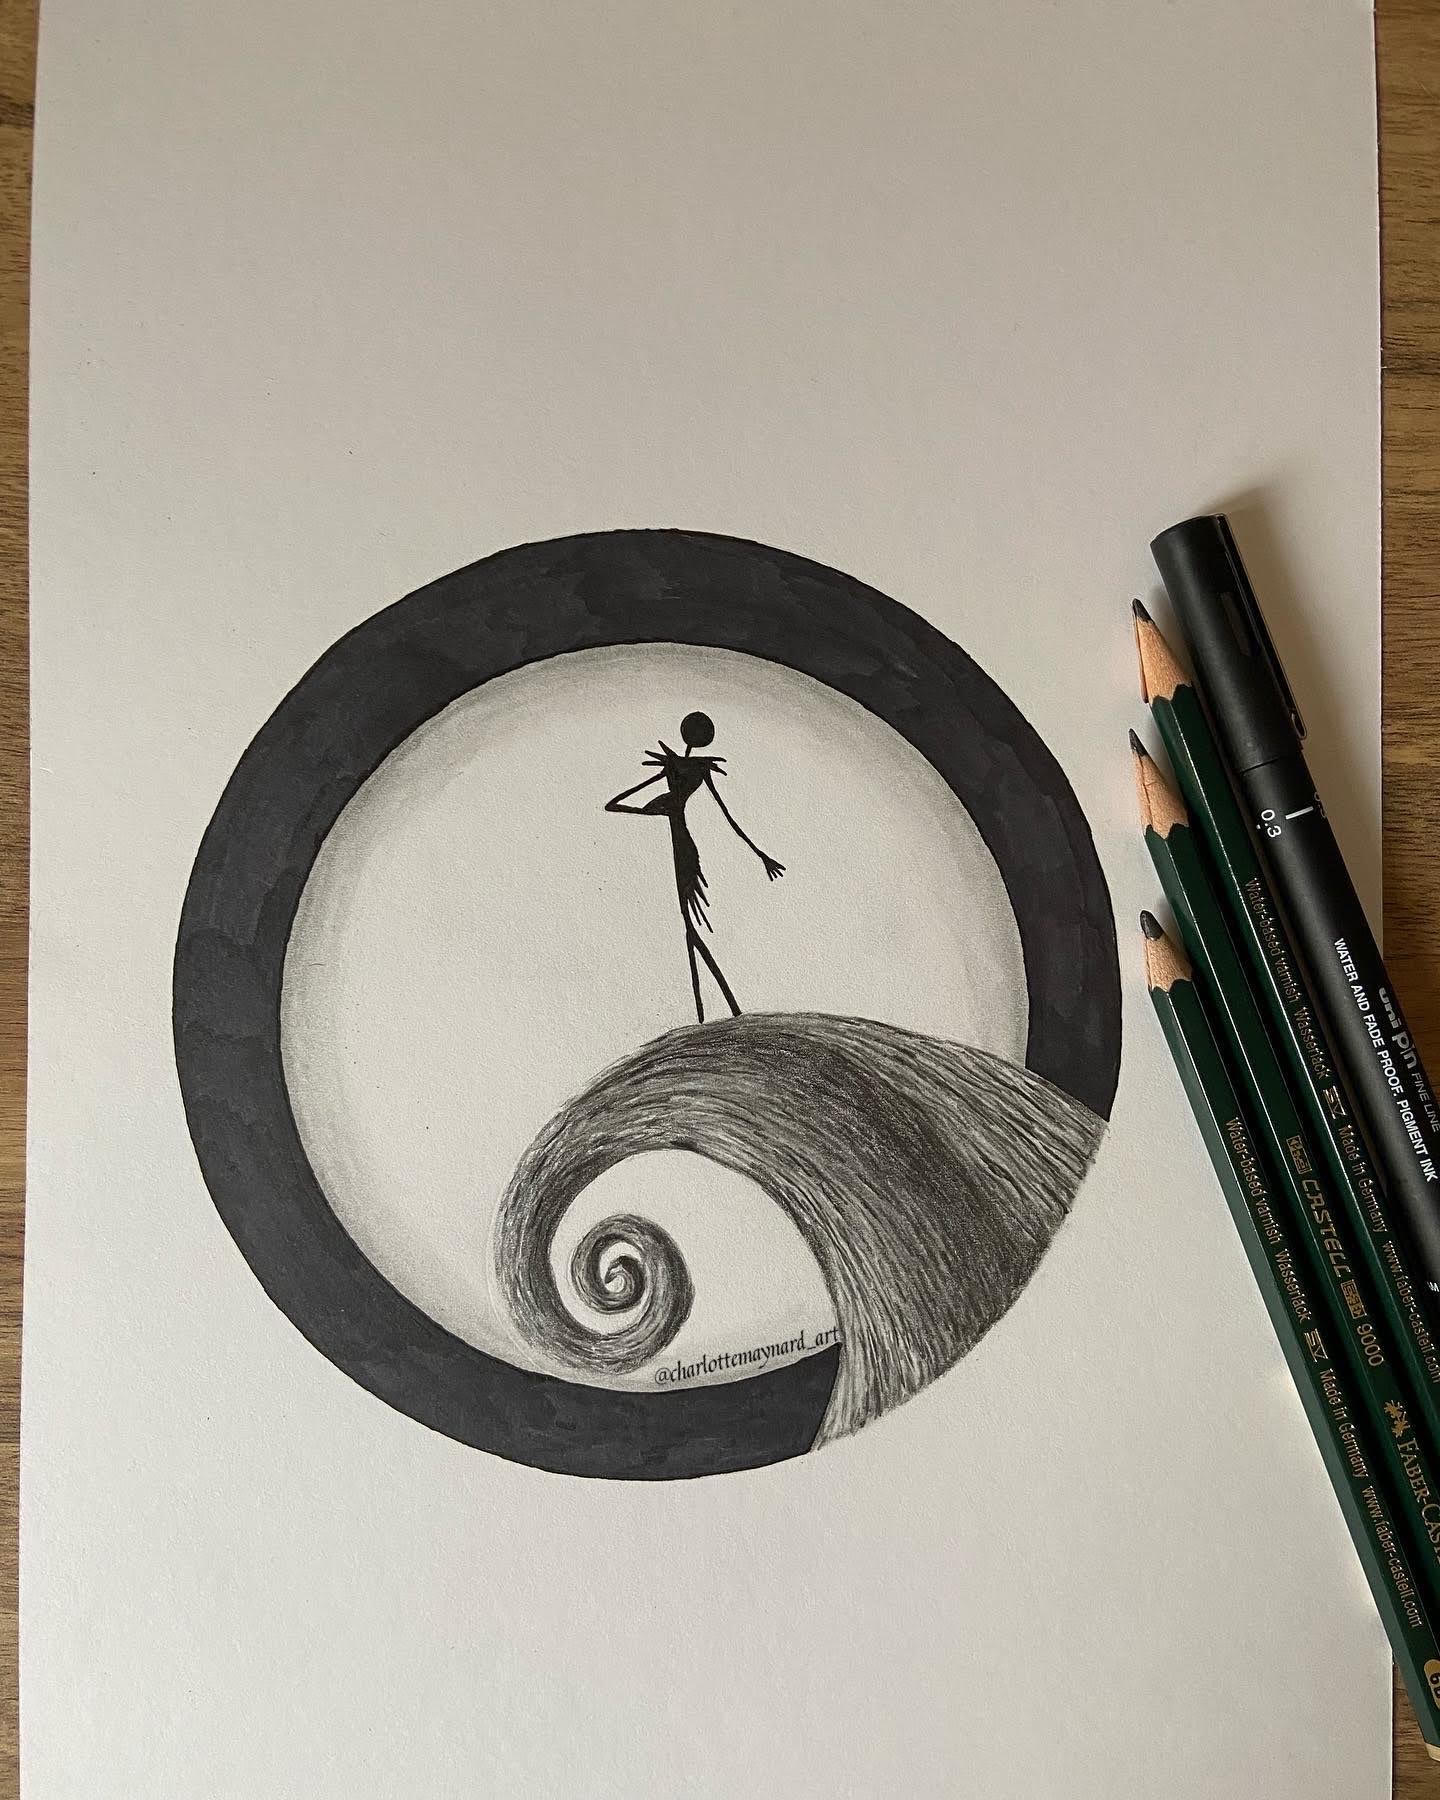 Pencil drawing of Jack Skellington from 'The Nightmare before Christmas'. Depicted as a silhouette